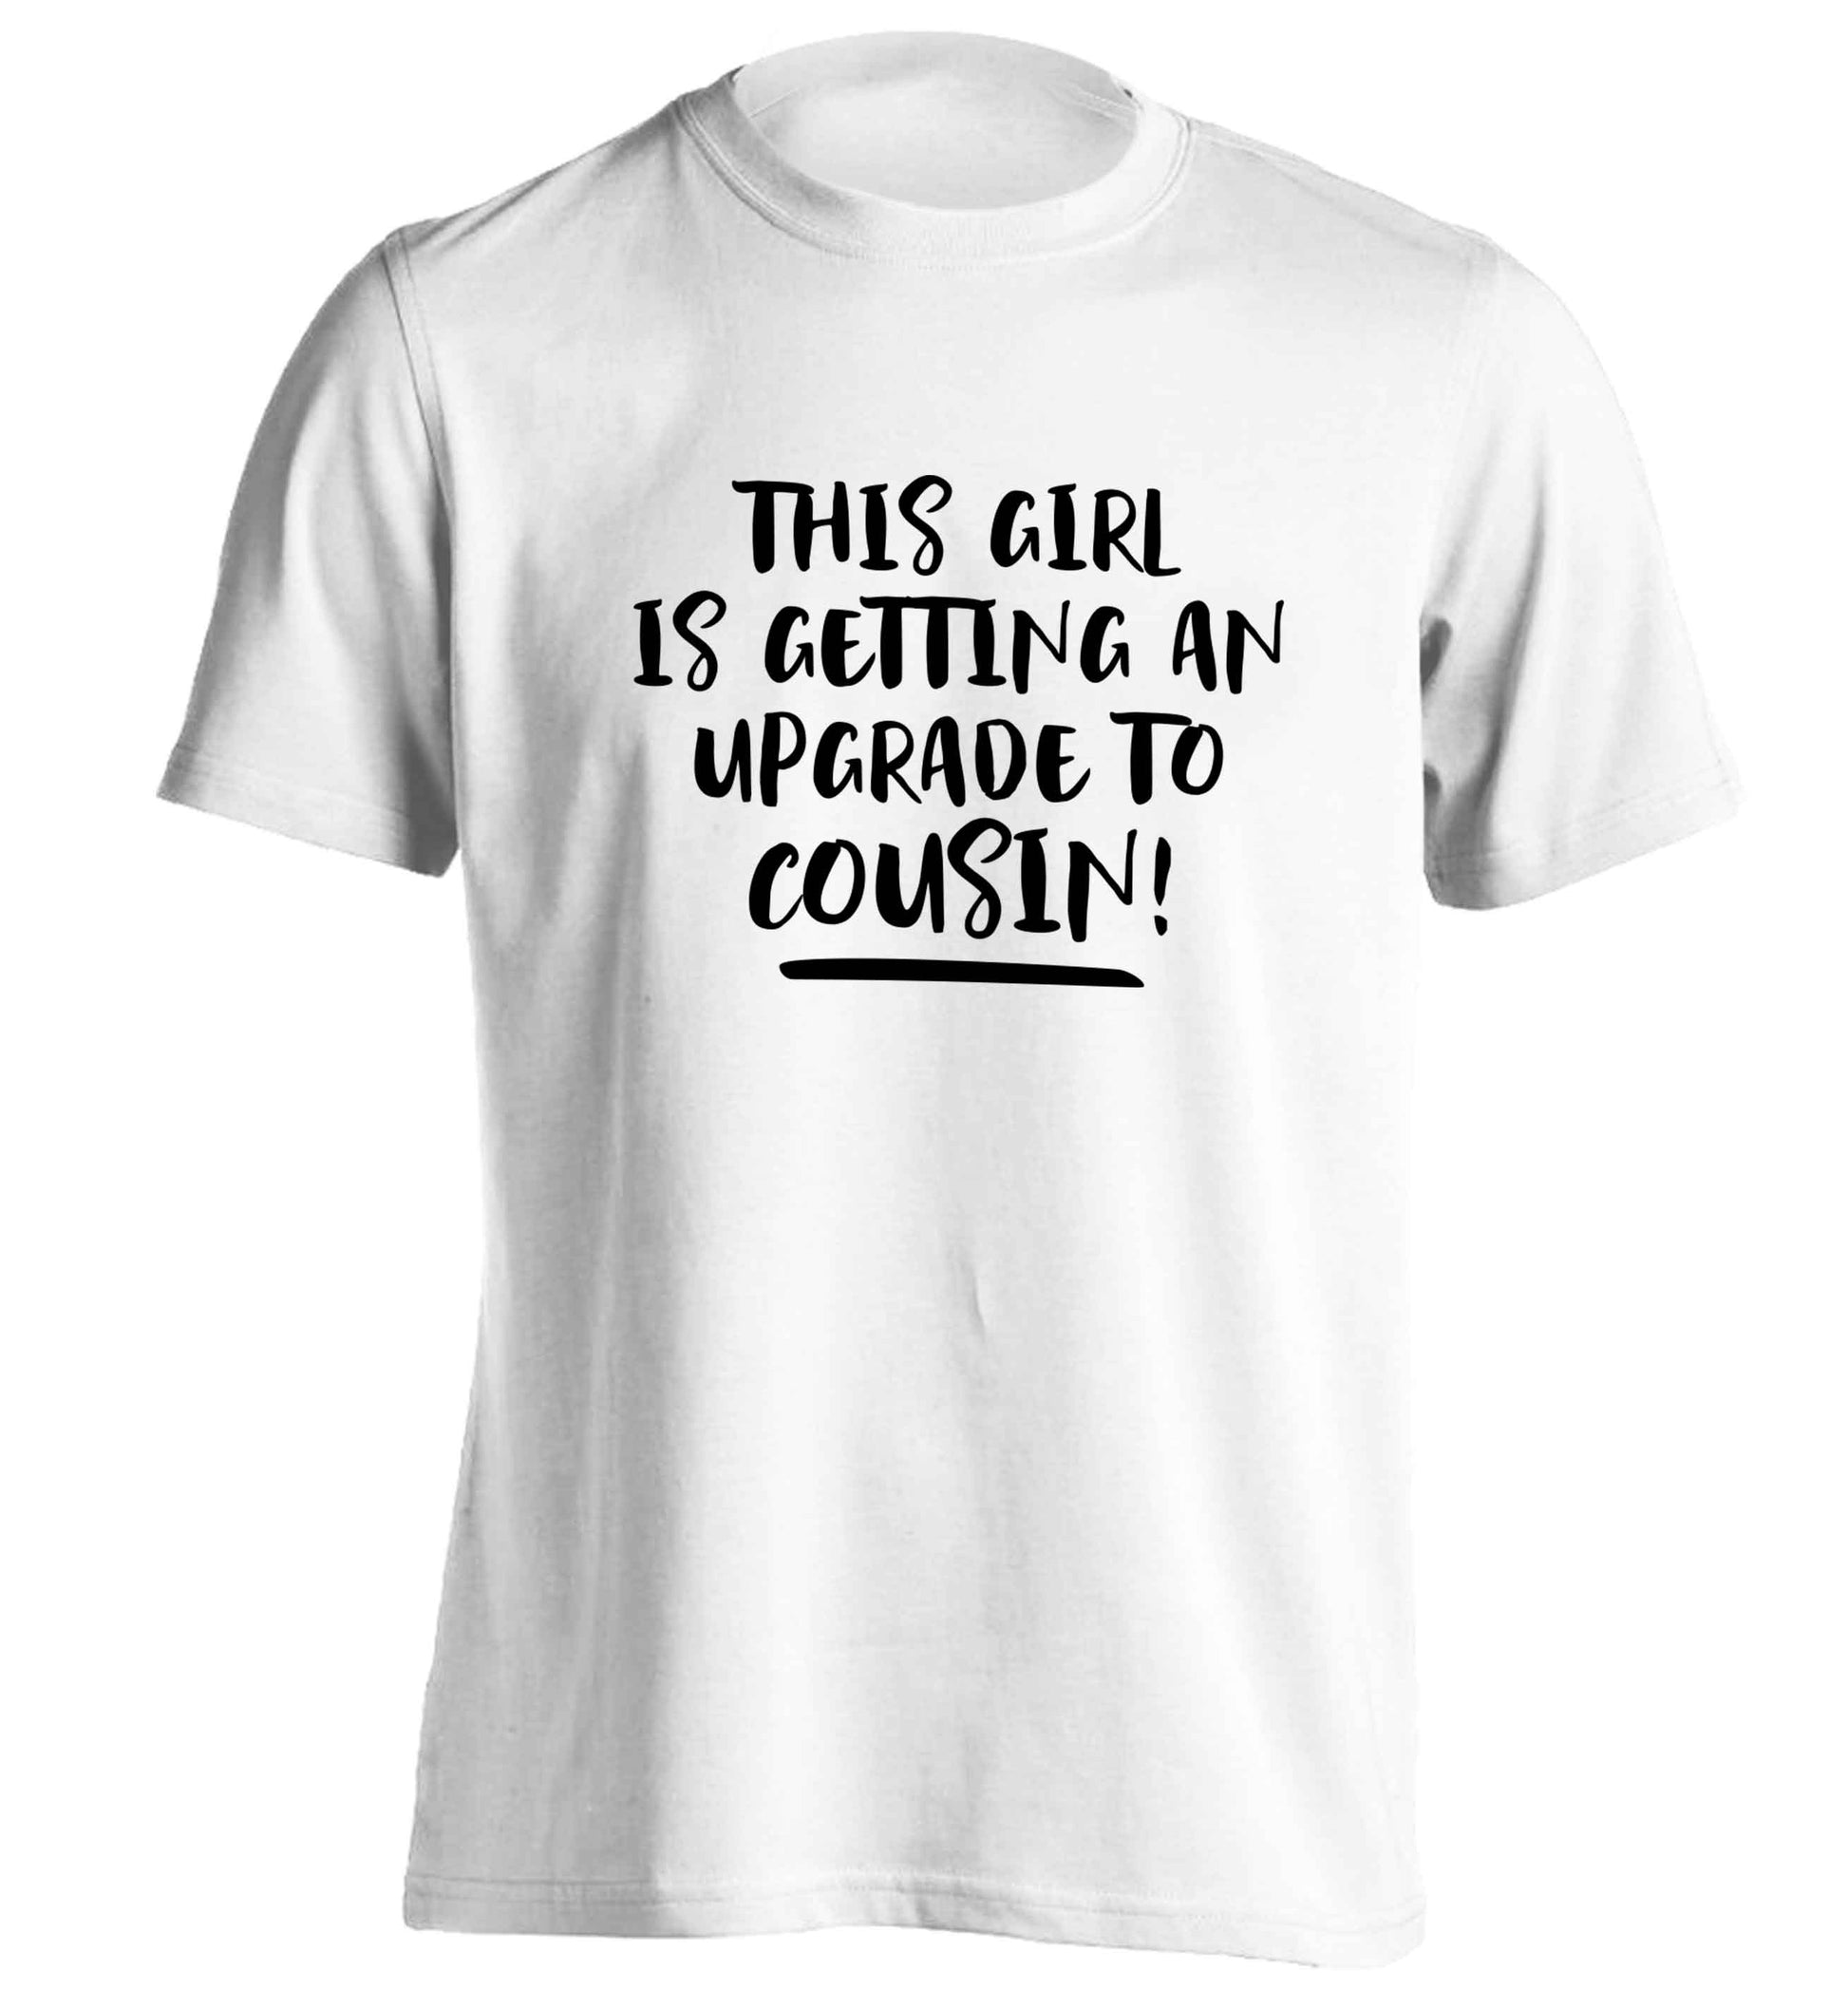 This girl is getting an upgrade to cousin! adults unisex white Tshirt 2XL